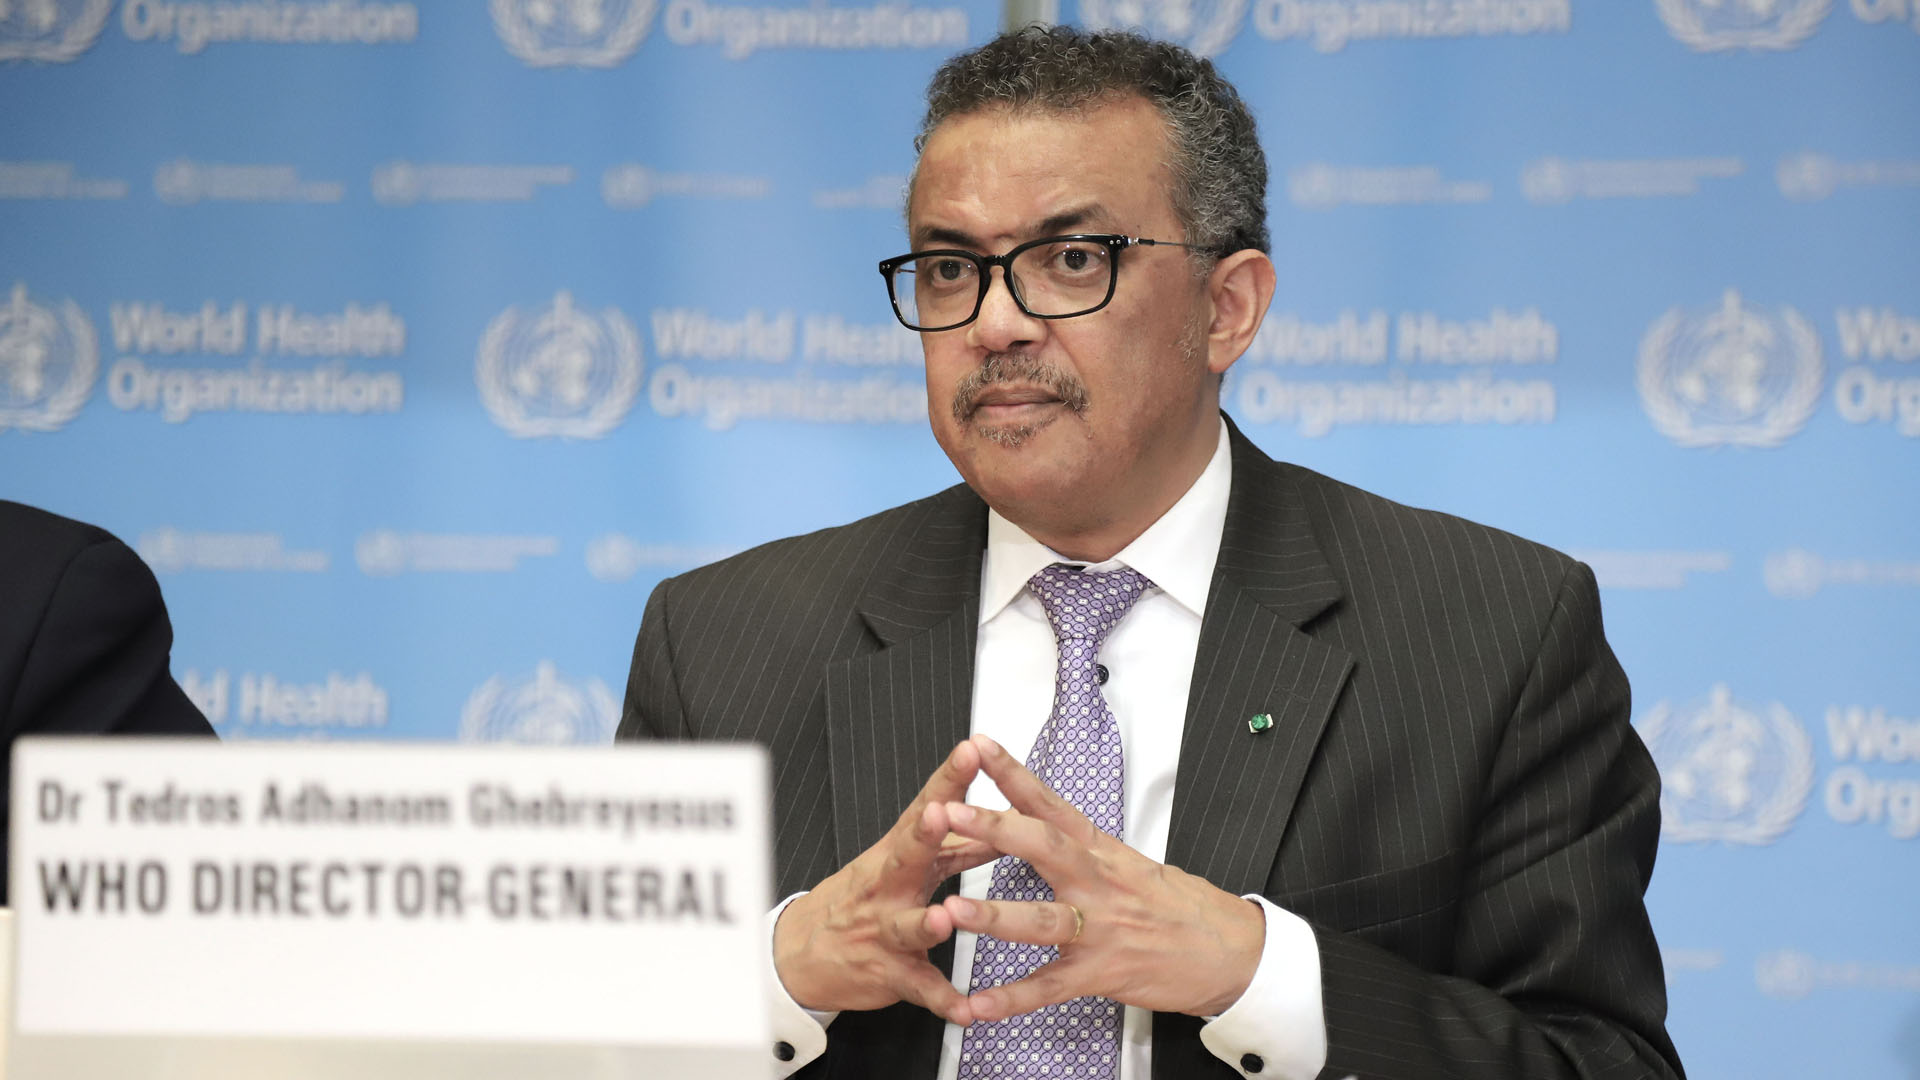 Global recovery could be faster if COVID vaccine made available to all: WHO chief